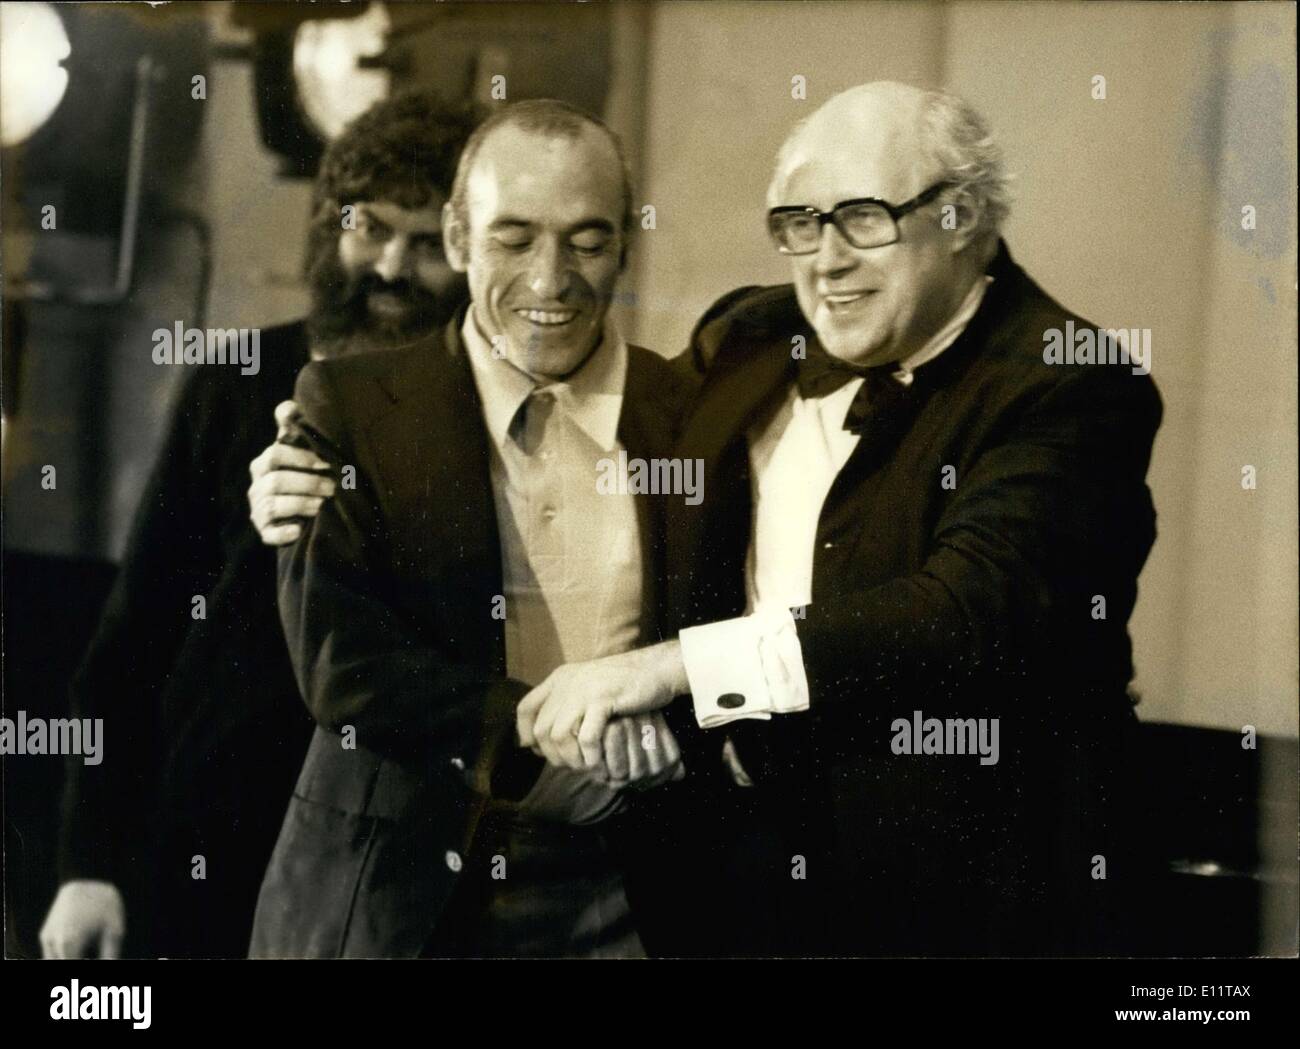 Feb. 28, 1980 - Estrella was recently freed from prison in Uruguay. He performed in a concert honoring the academic Andrei Sakharov who was ordered to live in Gorki (USSR) Stock Photo